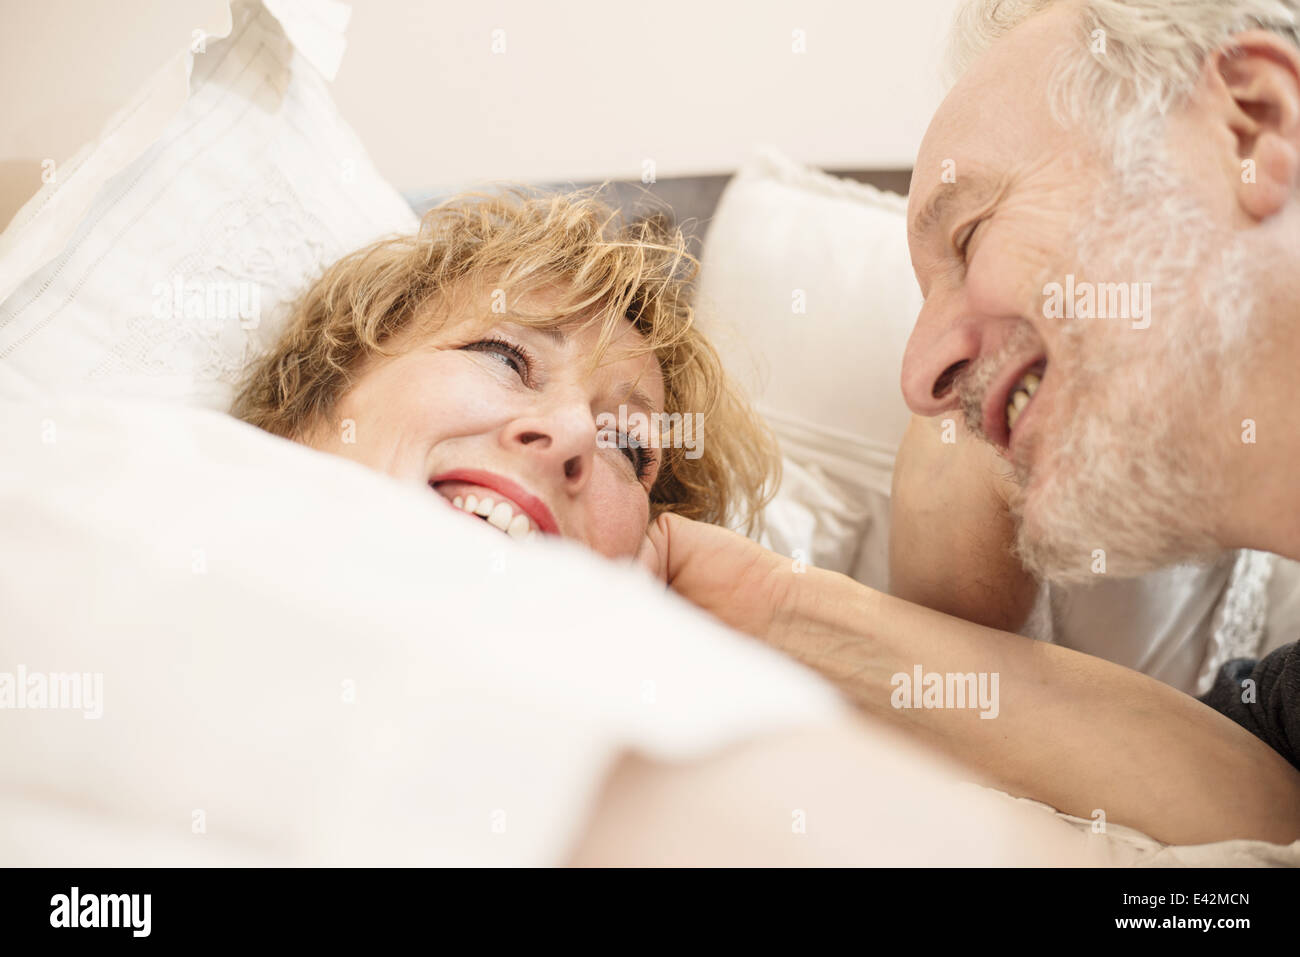 Couple in bed, smiling Stock Photo